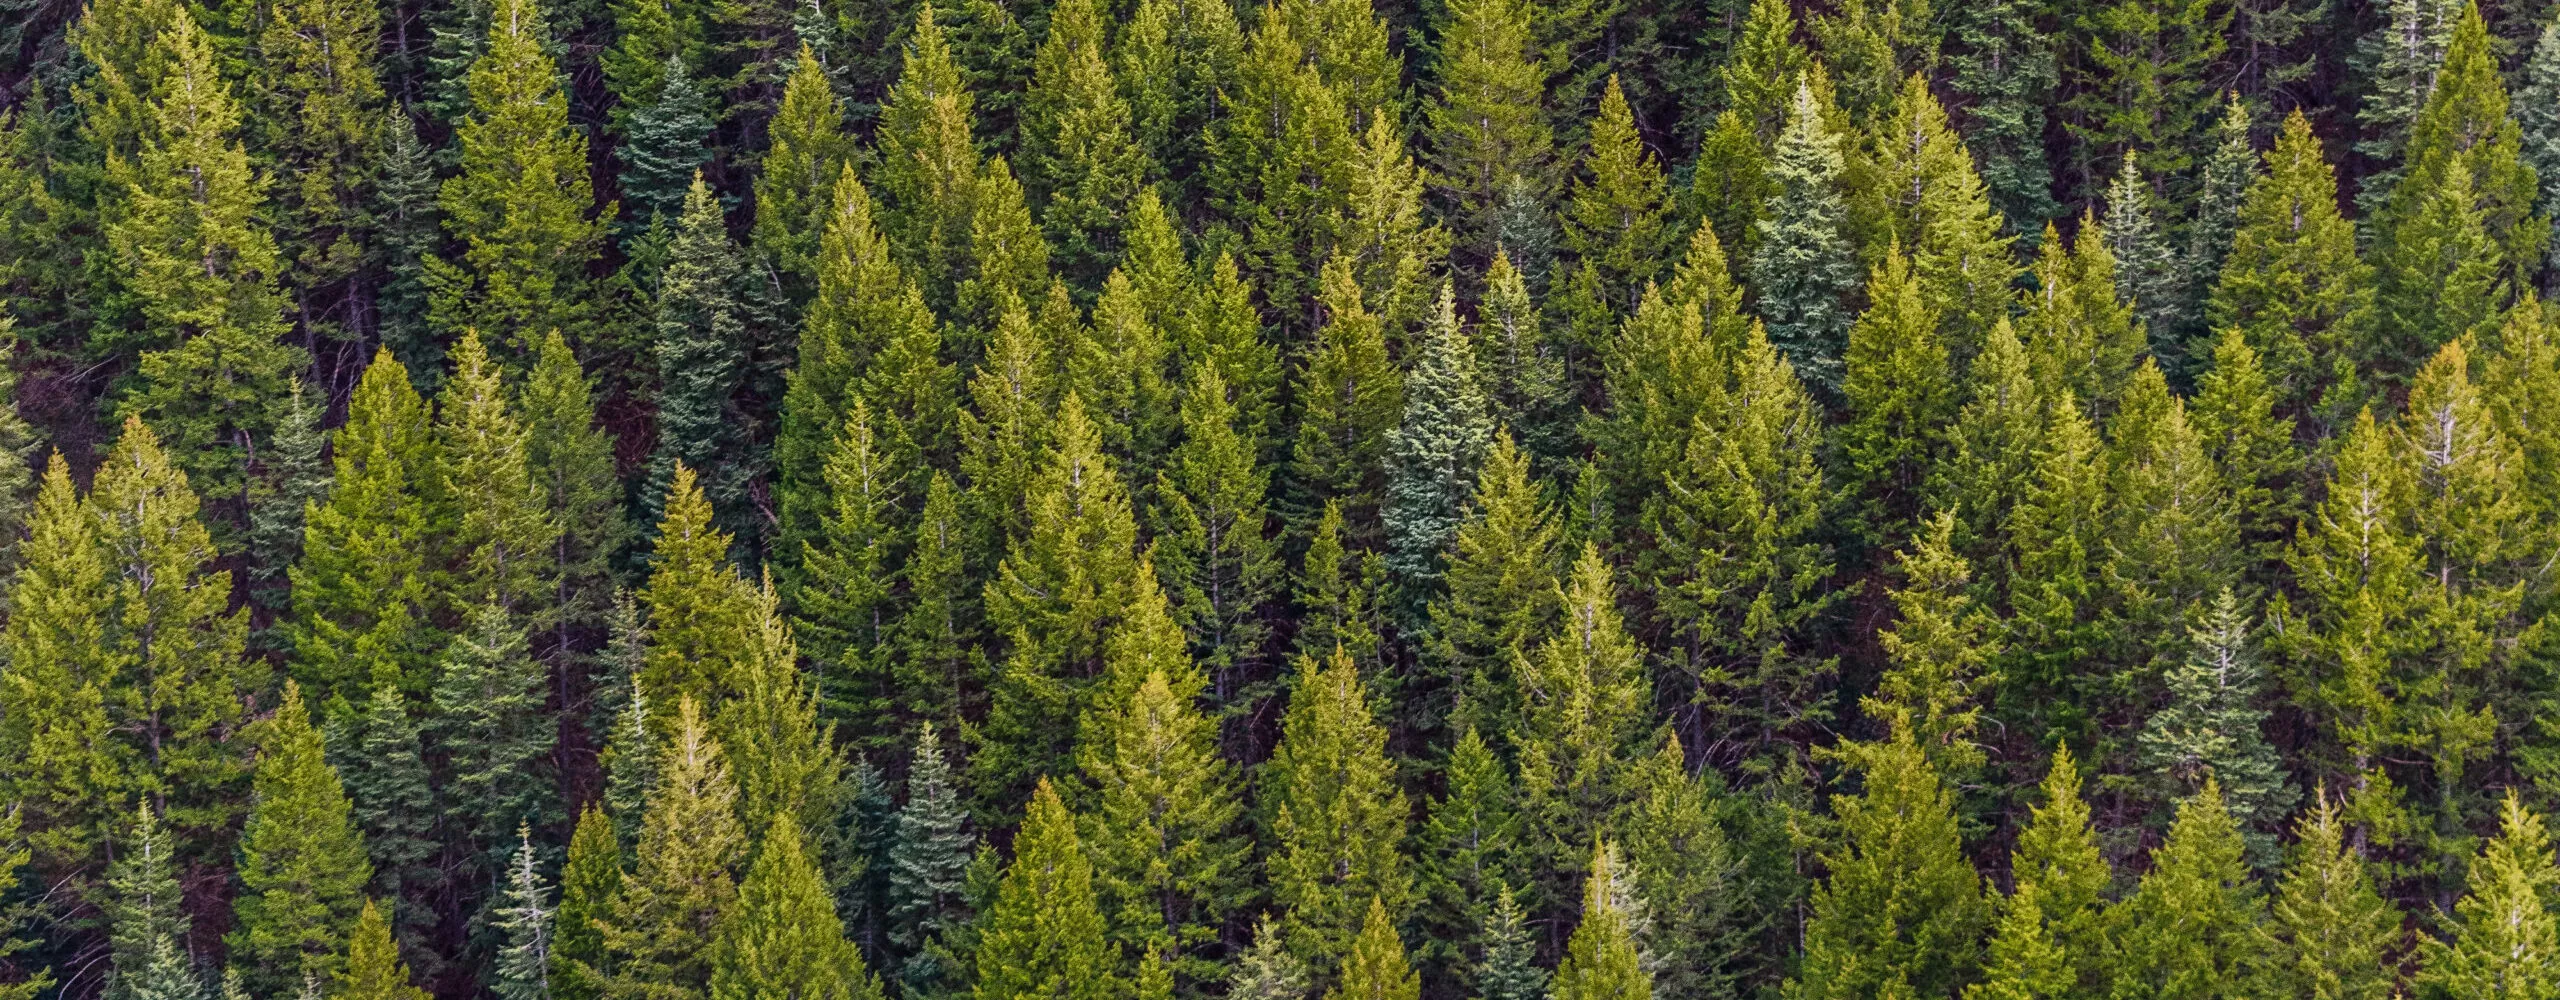 a conifer forest